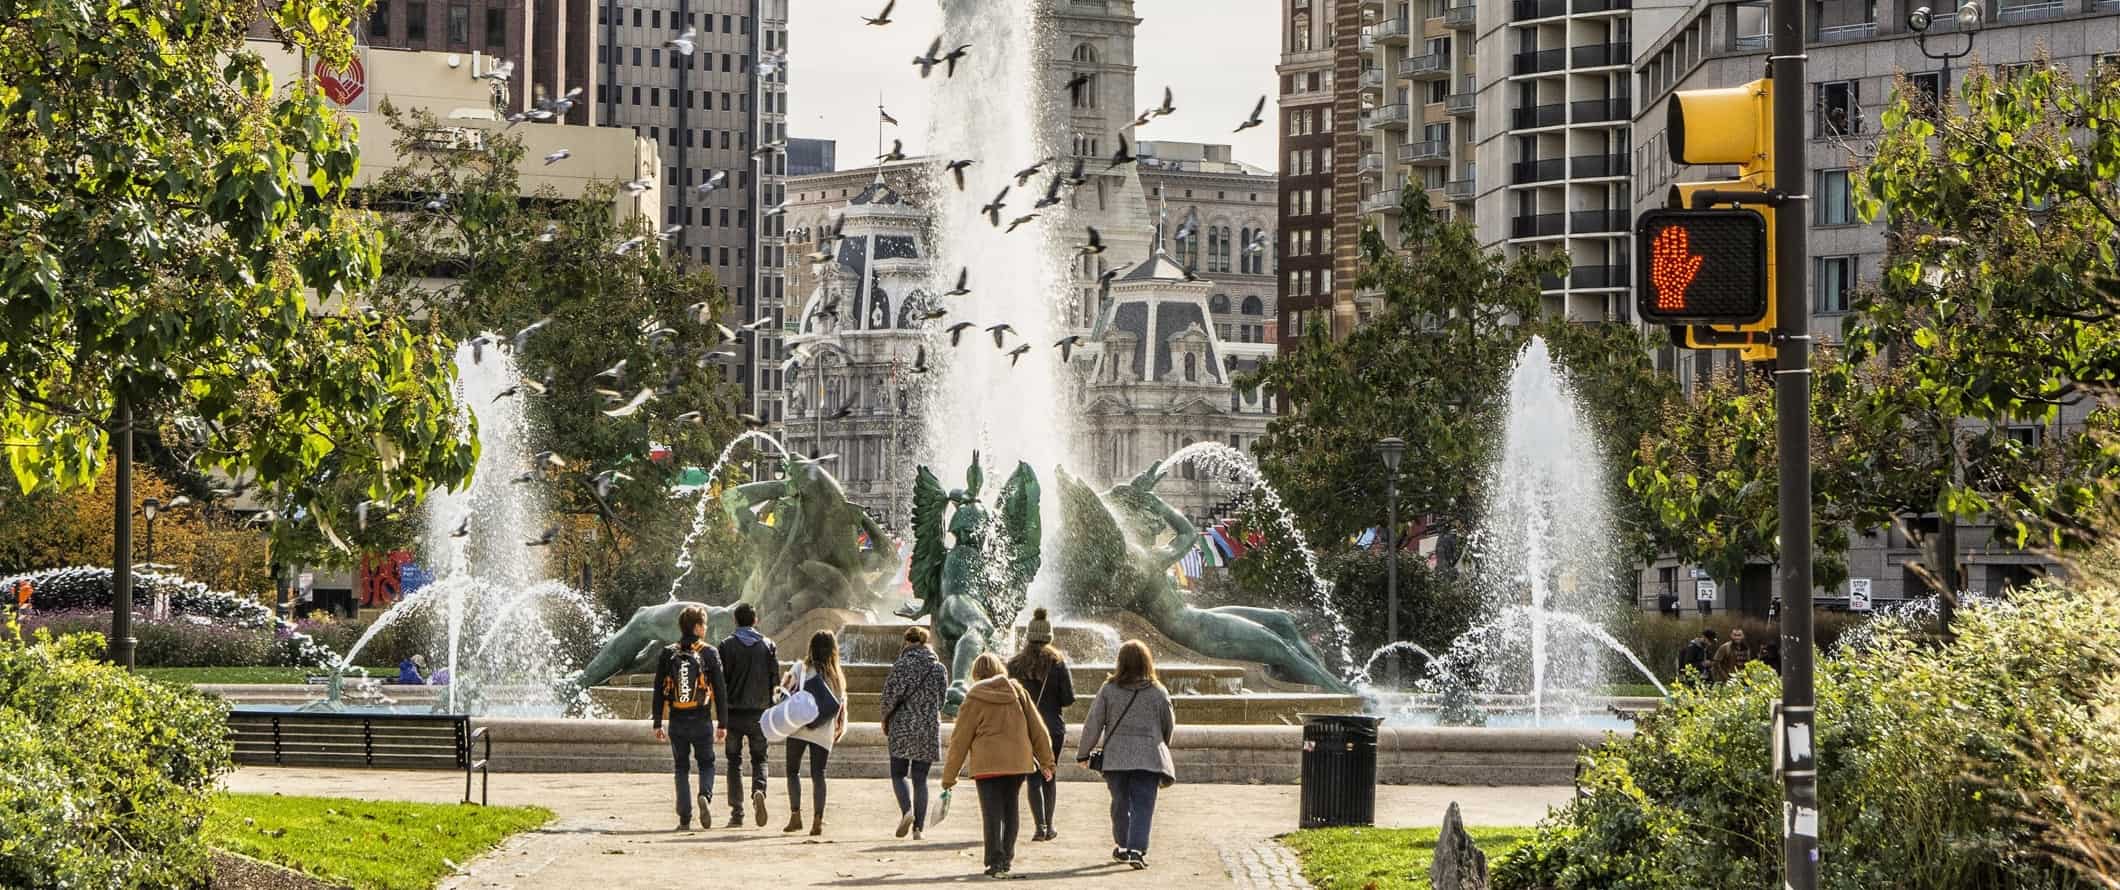 People walking in an urban park in front of a fountain in Philadelphia, USA